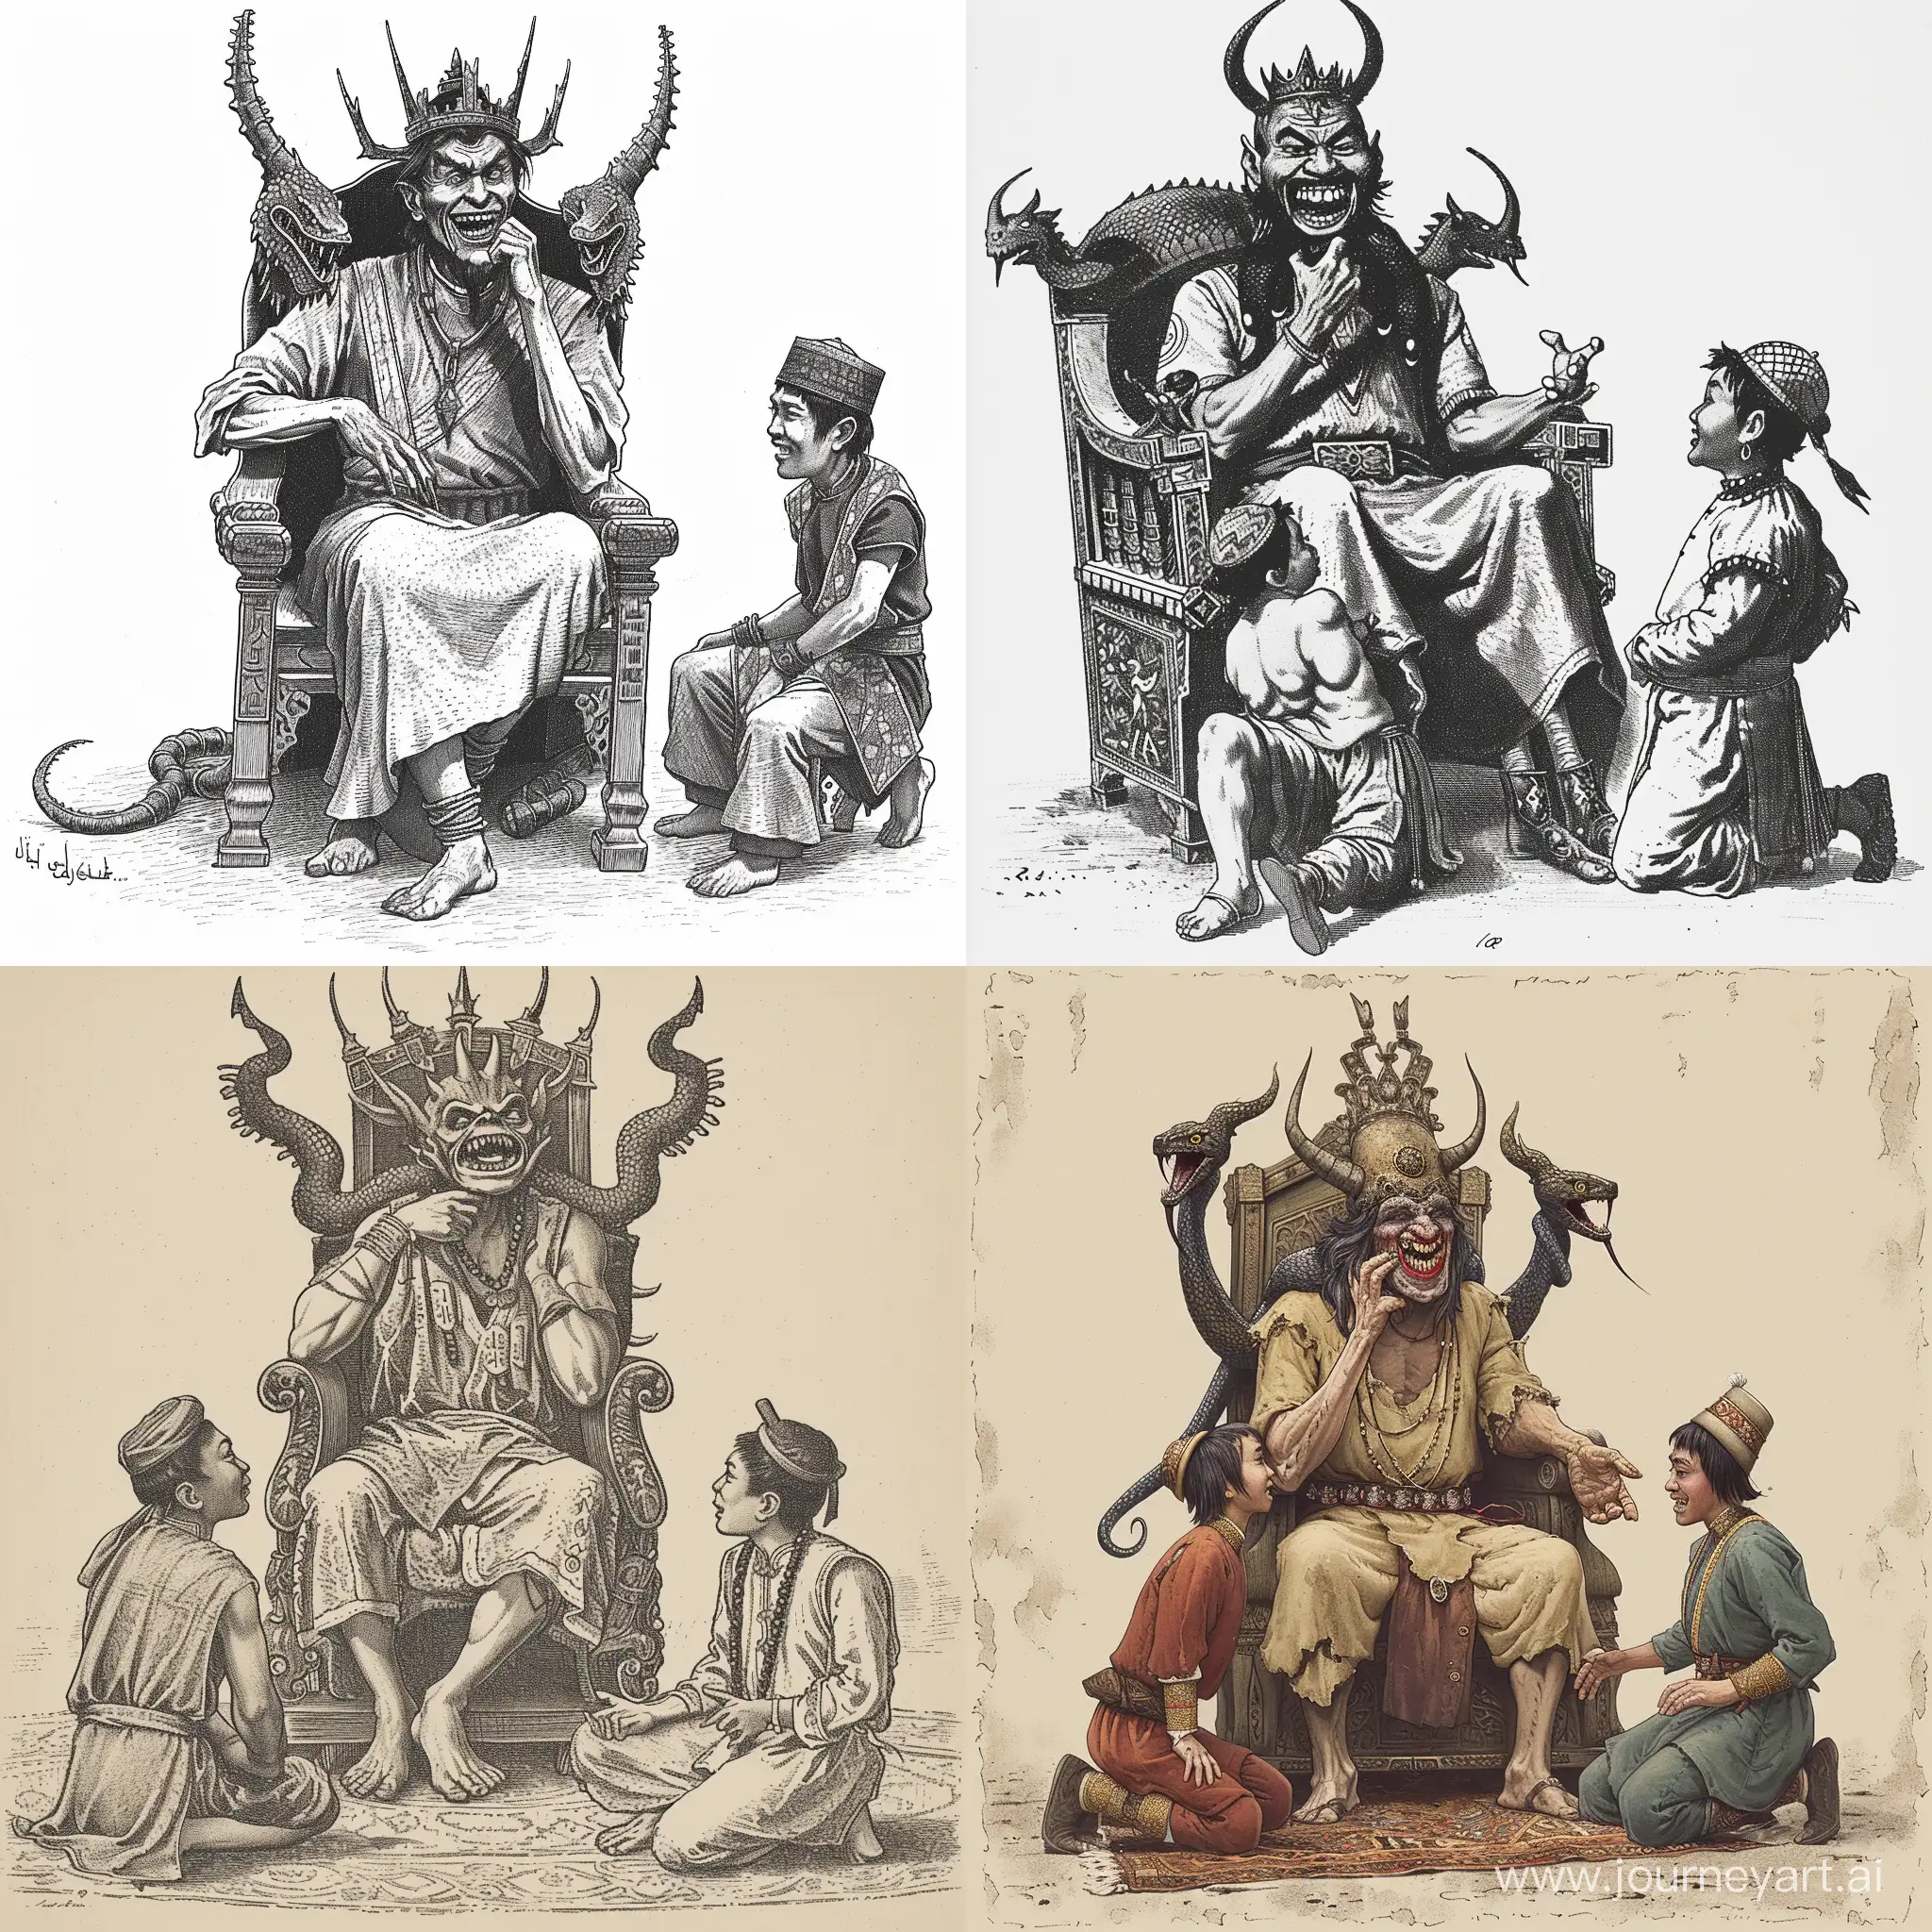 An ancient evil king with a serpent's head protruding from each shoulder sits on a king's throne with a two-horned crown and a hand under his chin, laughing menacingly, talking to his two sons who kneel in front of his seat.  One of his sons kneeling on the right side is wearing Arabic clothes and the other son is wearing Mongolian clothes